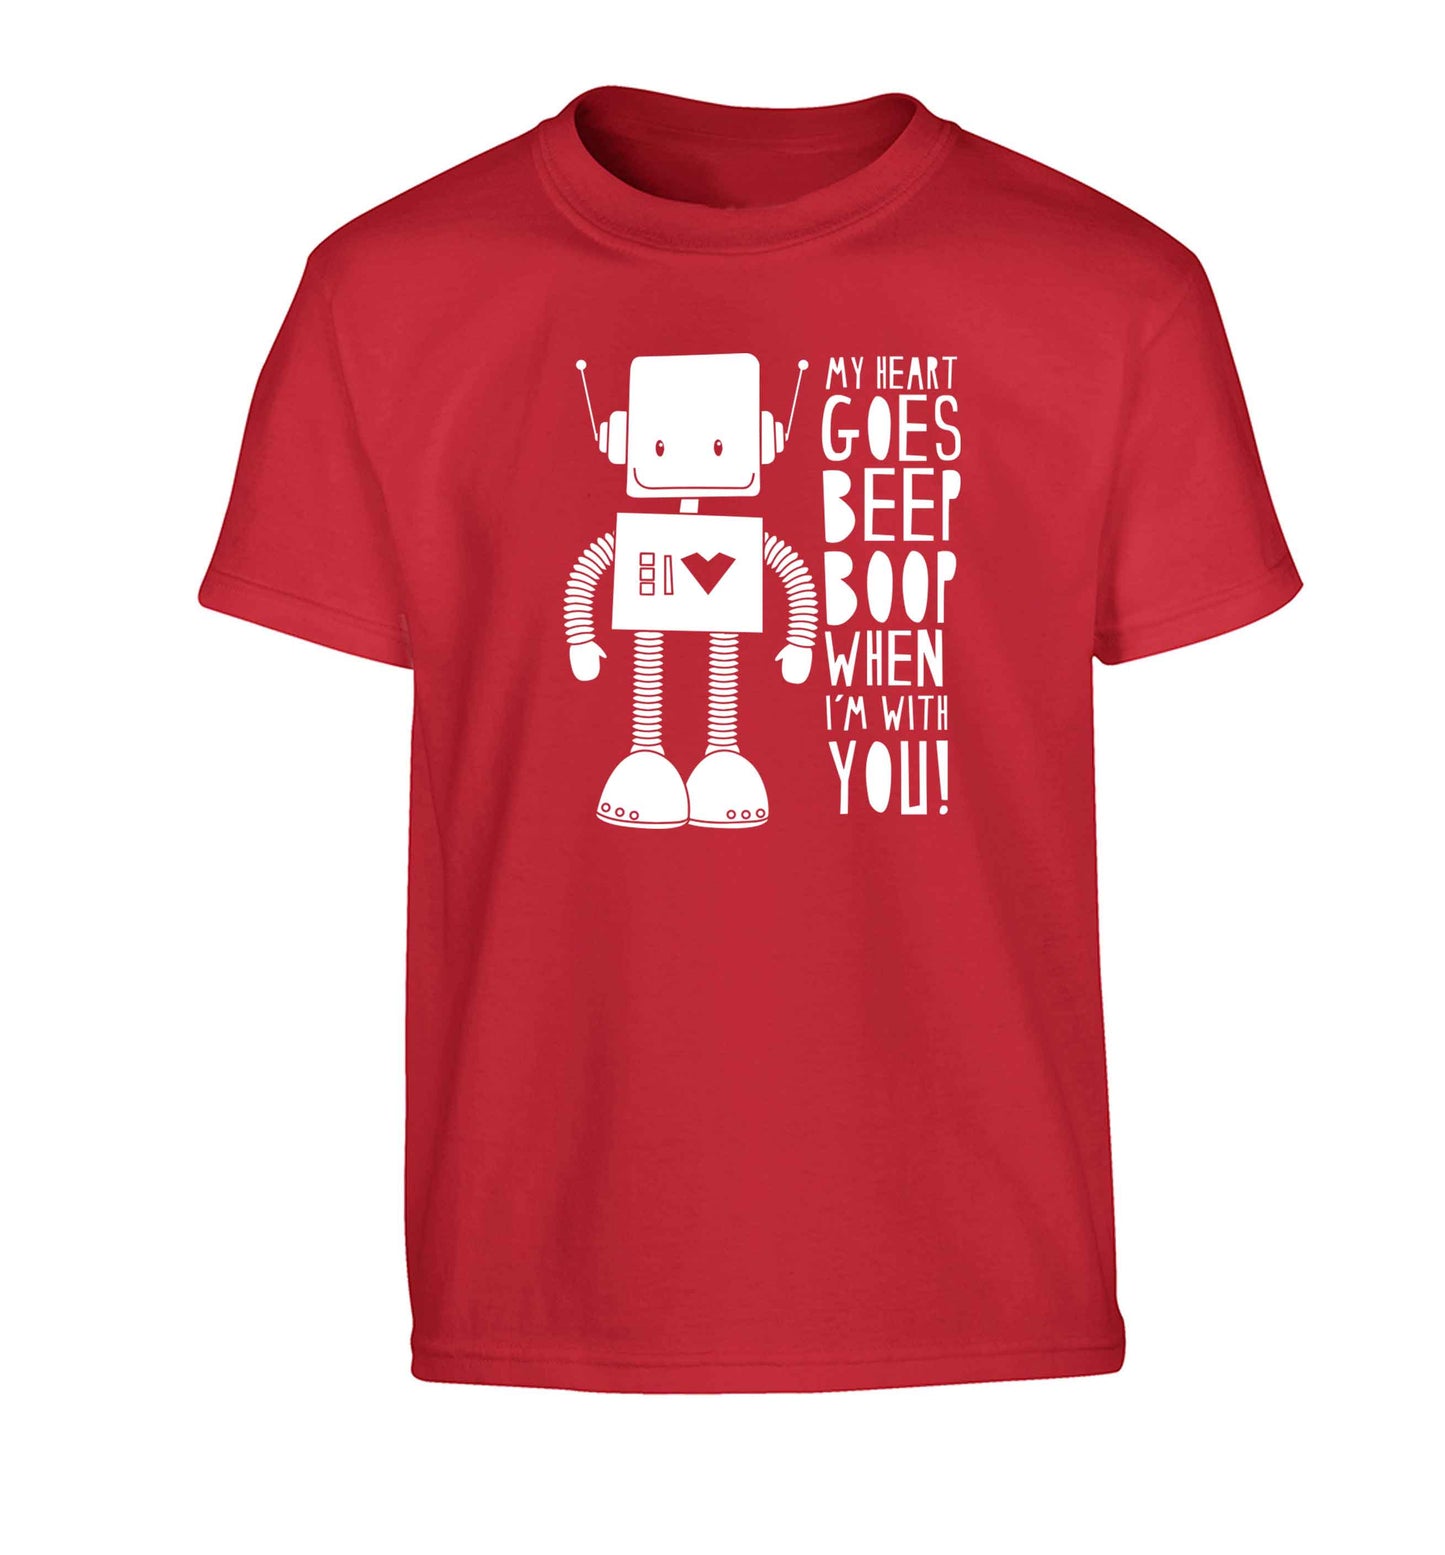 My heart goes beep boop when I'm with you Children's red Tshirt 12-13 Years